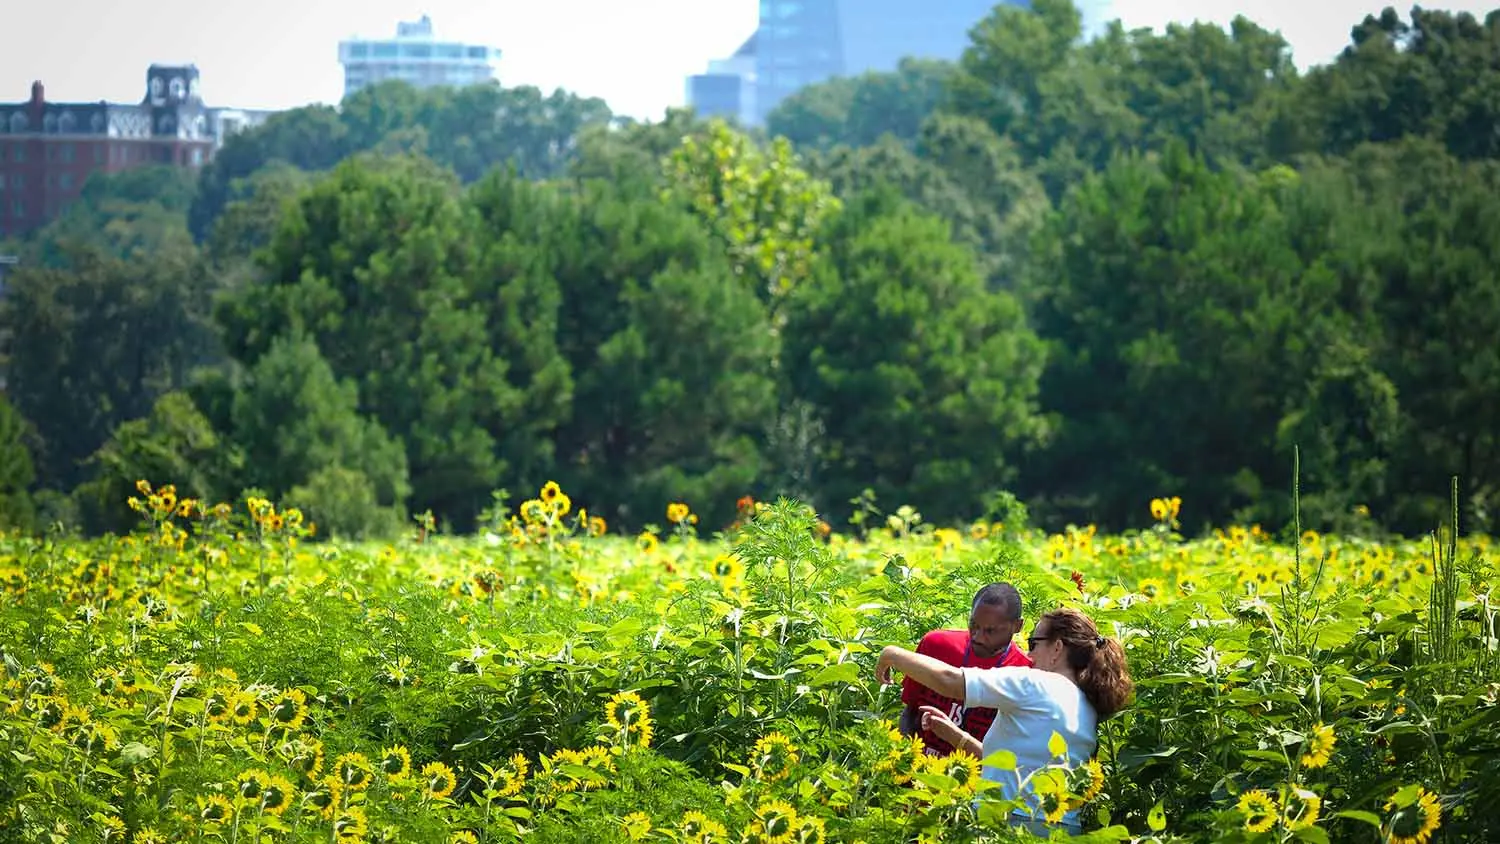 People enjoy a field of sunflowers in Dix Park, with downtown Raleigh's skyline in the background.